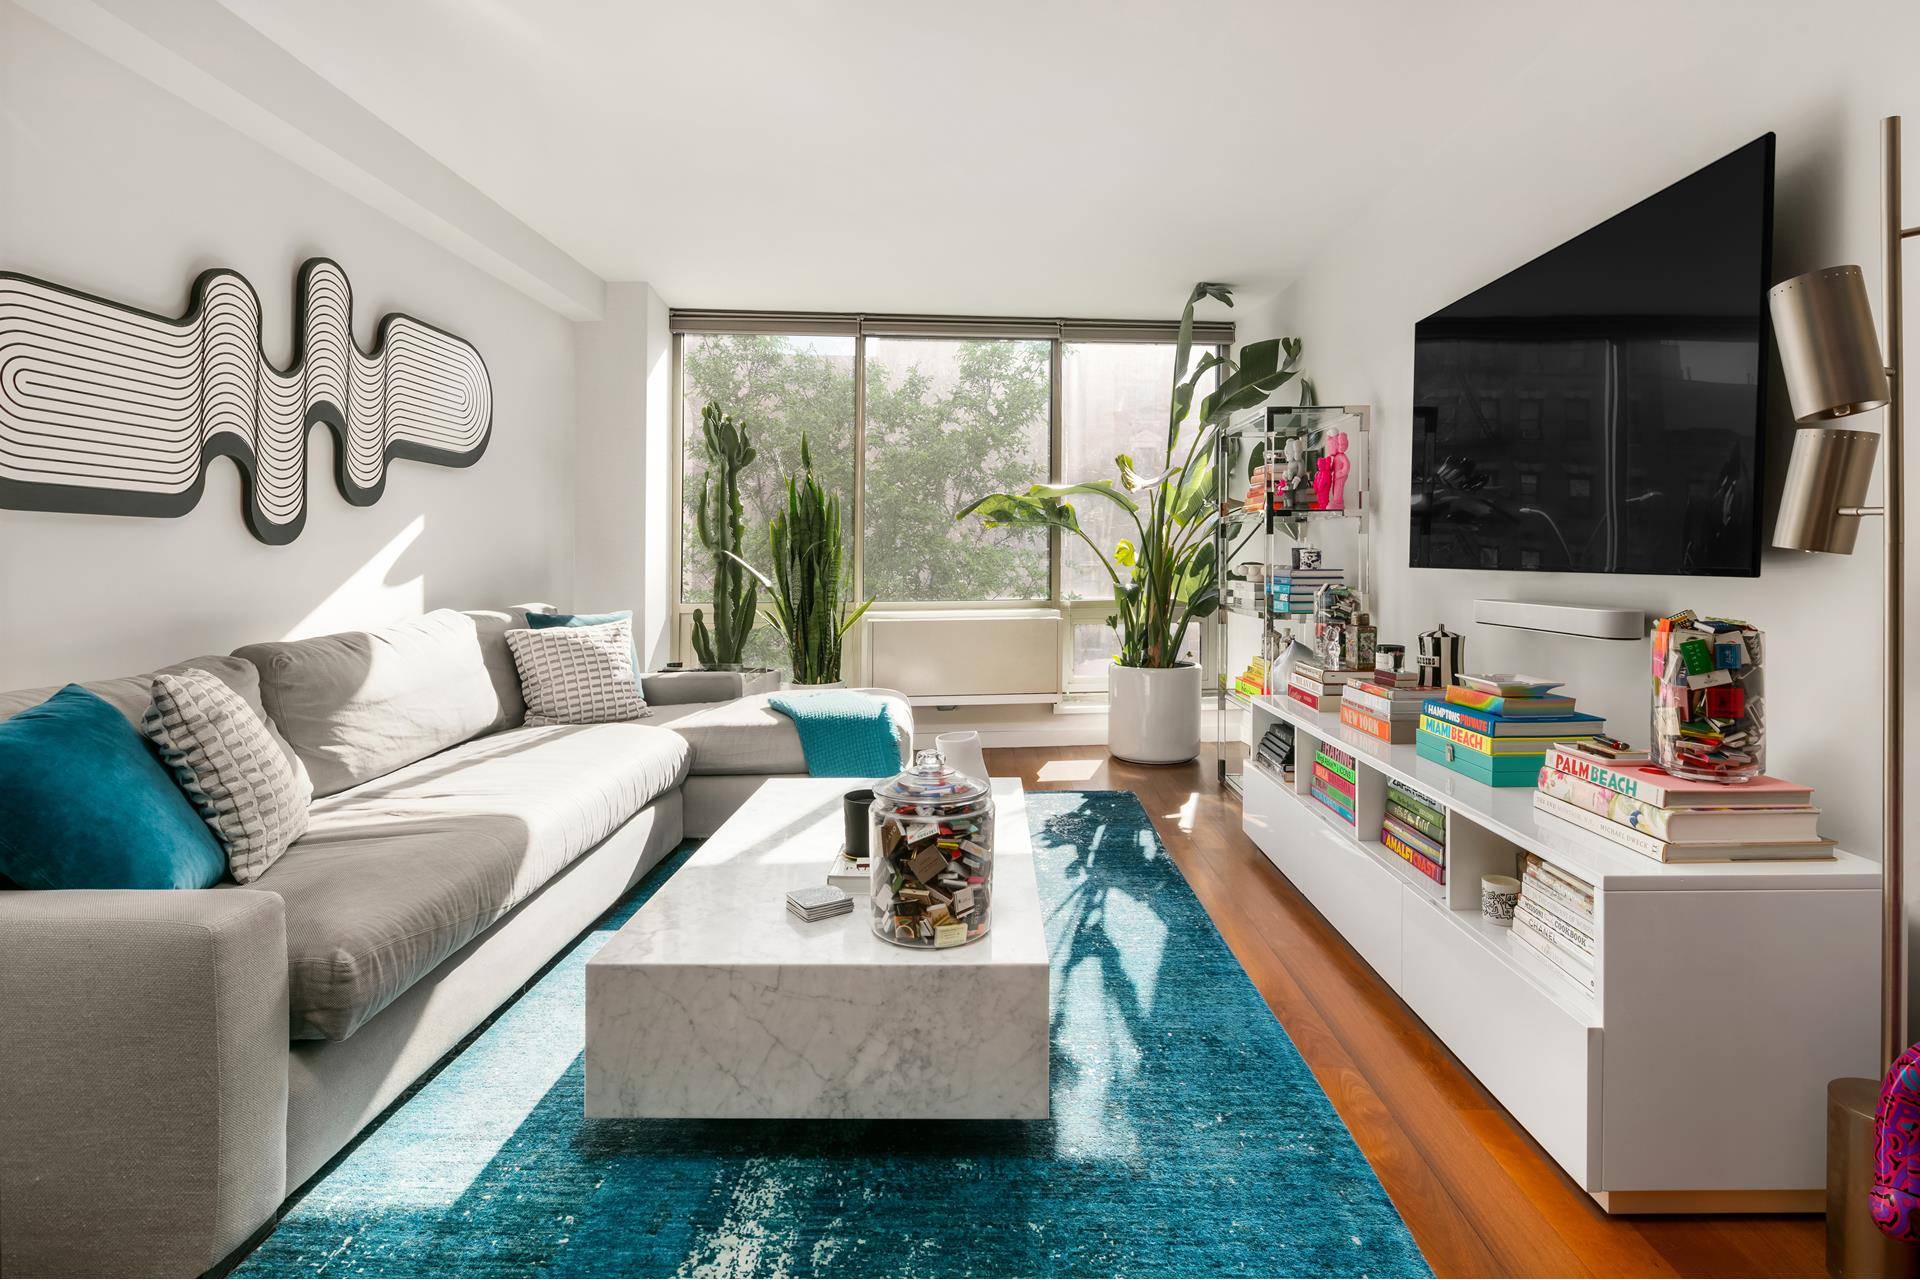 Sun drenched contemporary condo living awaits in this mint condition one bedroom, one bathroom residence featuring upscale finishes, incredible storage, and an unbeatable location where the East Village meets the ...